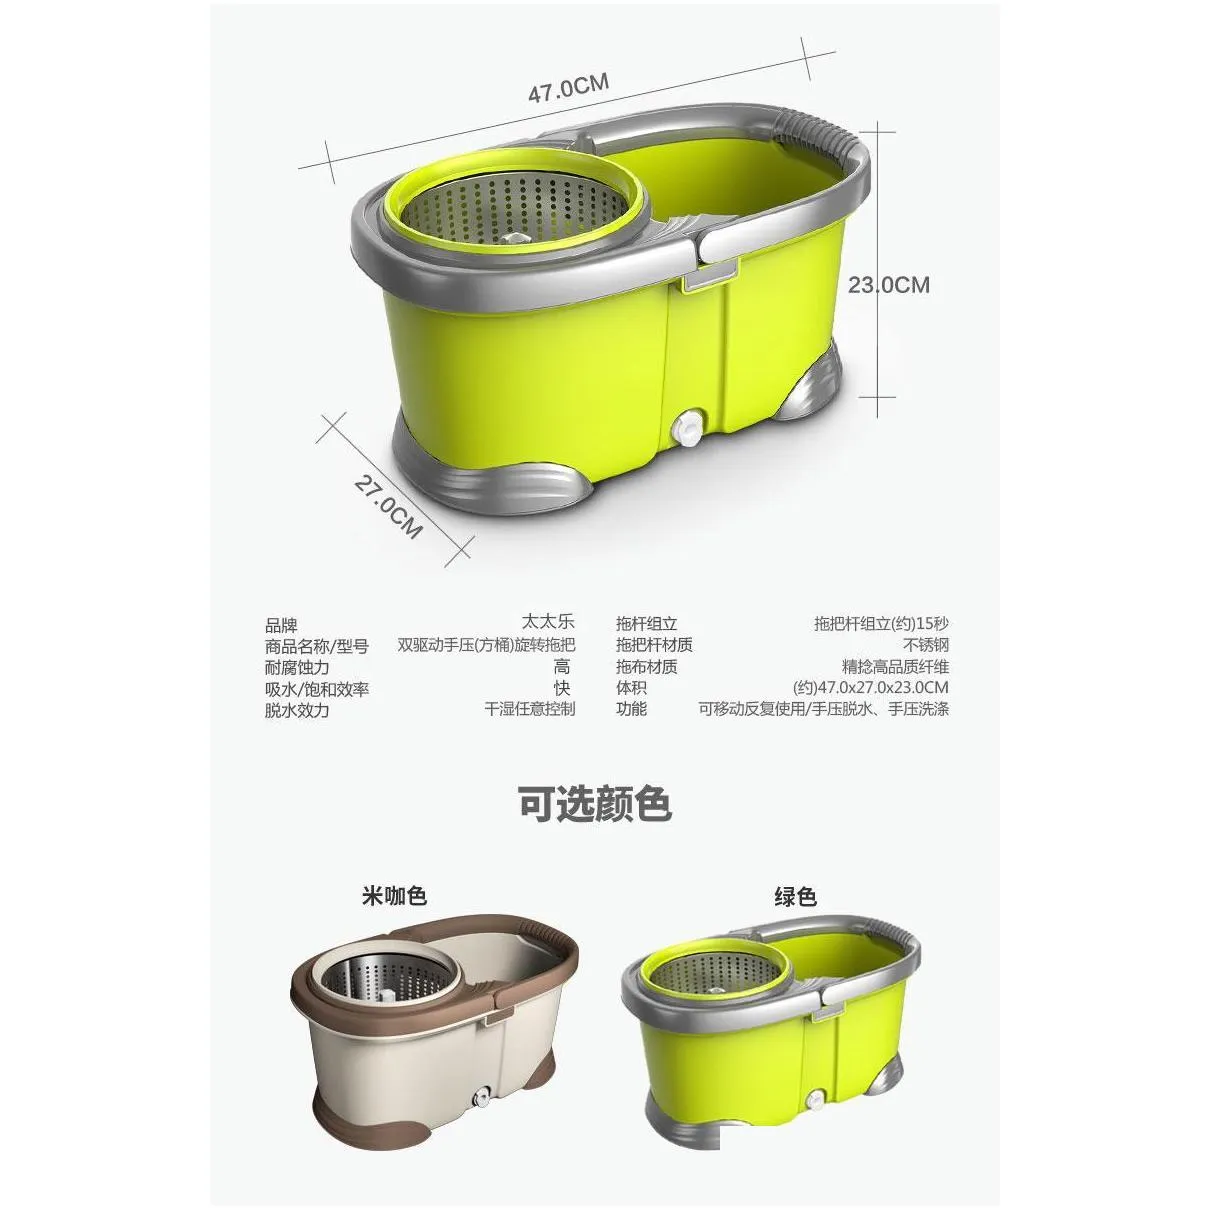 buckets 5 years warranty mrs. rotary mop bucket hand wet and dry dualuse household dehydration